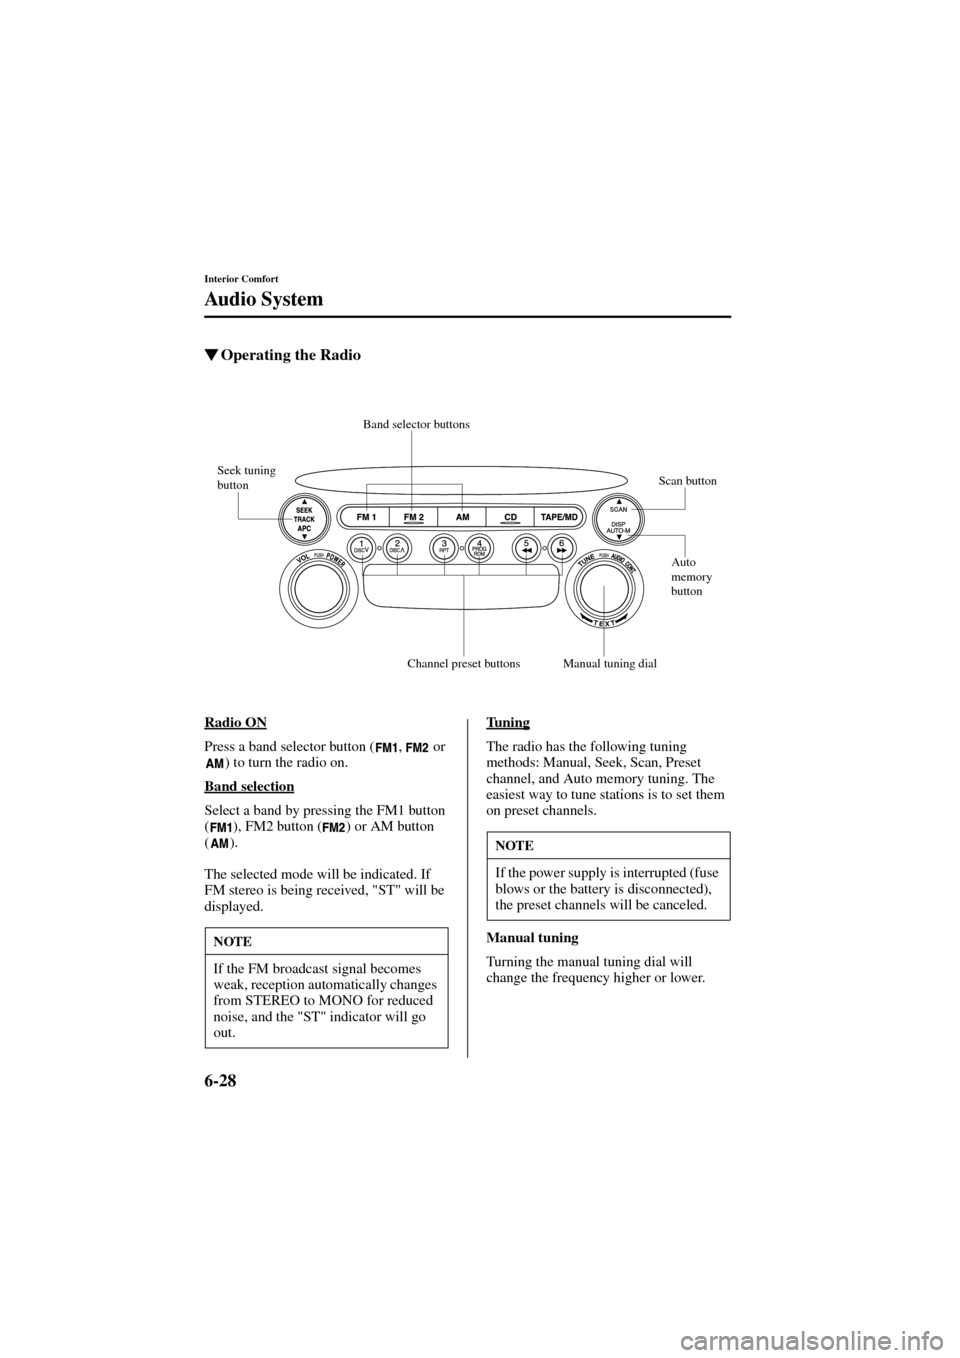 MAZDA MODEL 6 2004  Owners Manual (in English) 6-28
Interior Comfort
Audio System
Form No. 8R29-EA-02I
Operating the Radio
Radio ON
Press a band selector button ( ,   or 
) to turn the radio on.
Band selection
Select a band by pressing the FM1 bu